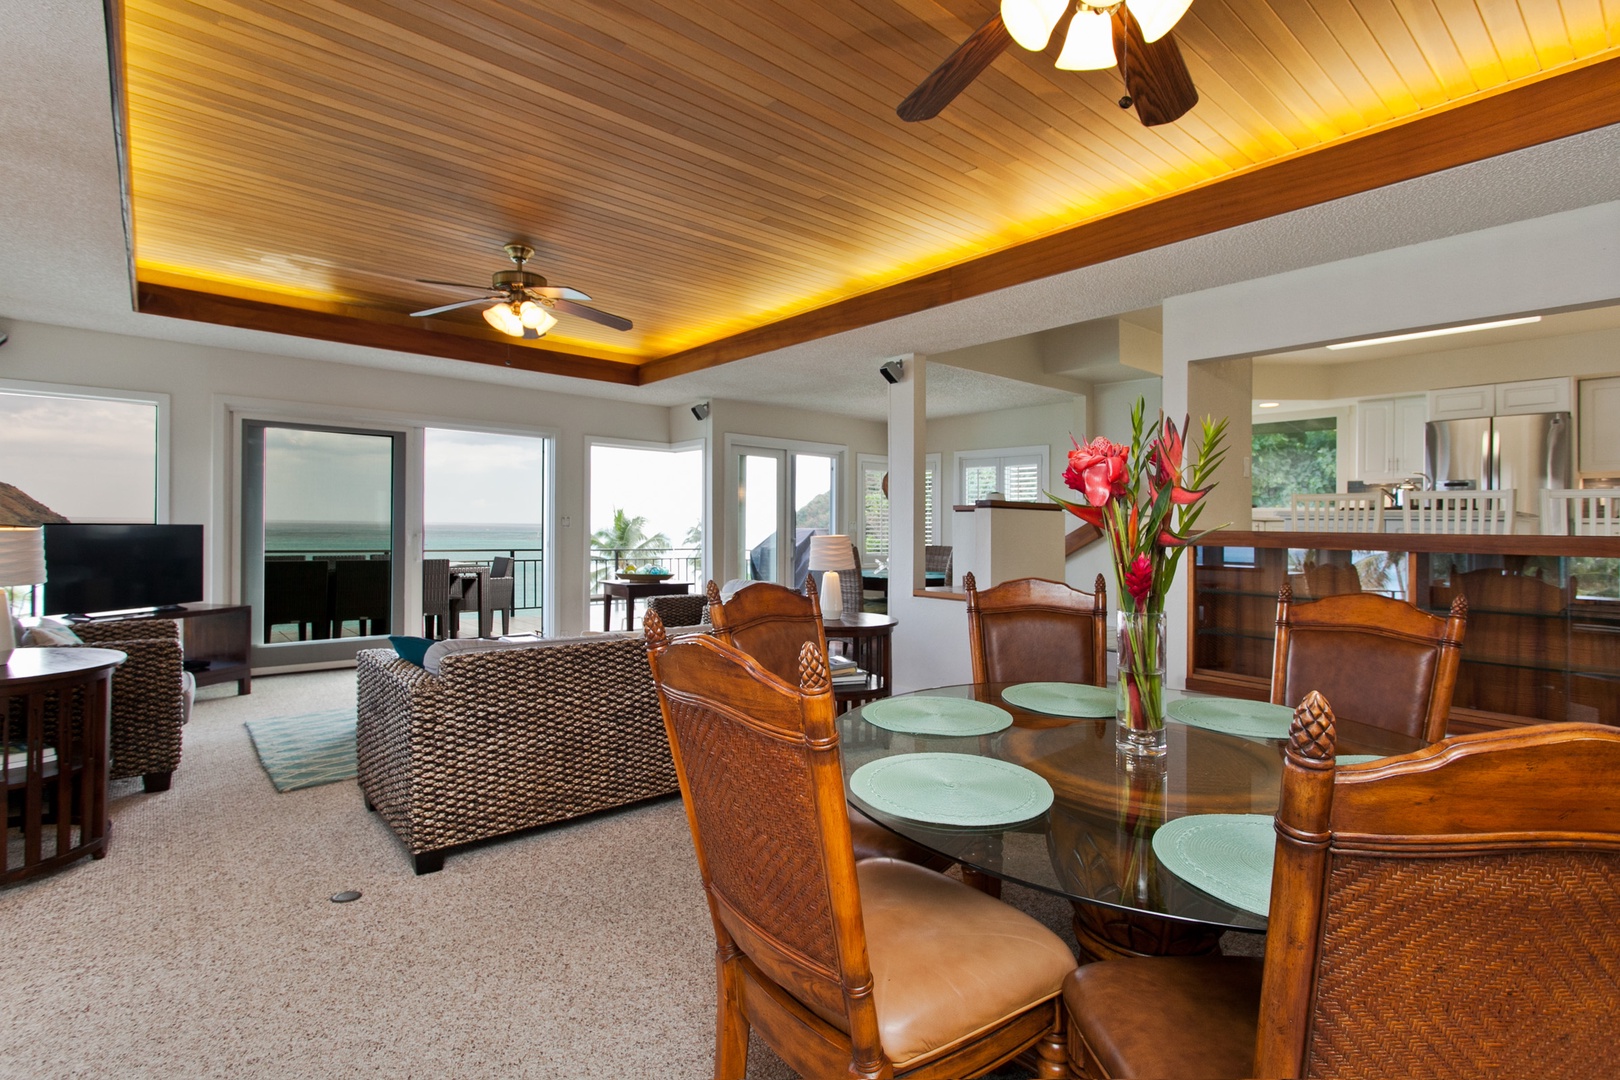 Kailua Vacation Rentals, Hale Kolea* - Gather and dine in a space where warm woods and soft light create an inviting atmosphere.